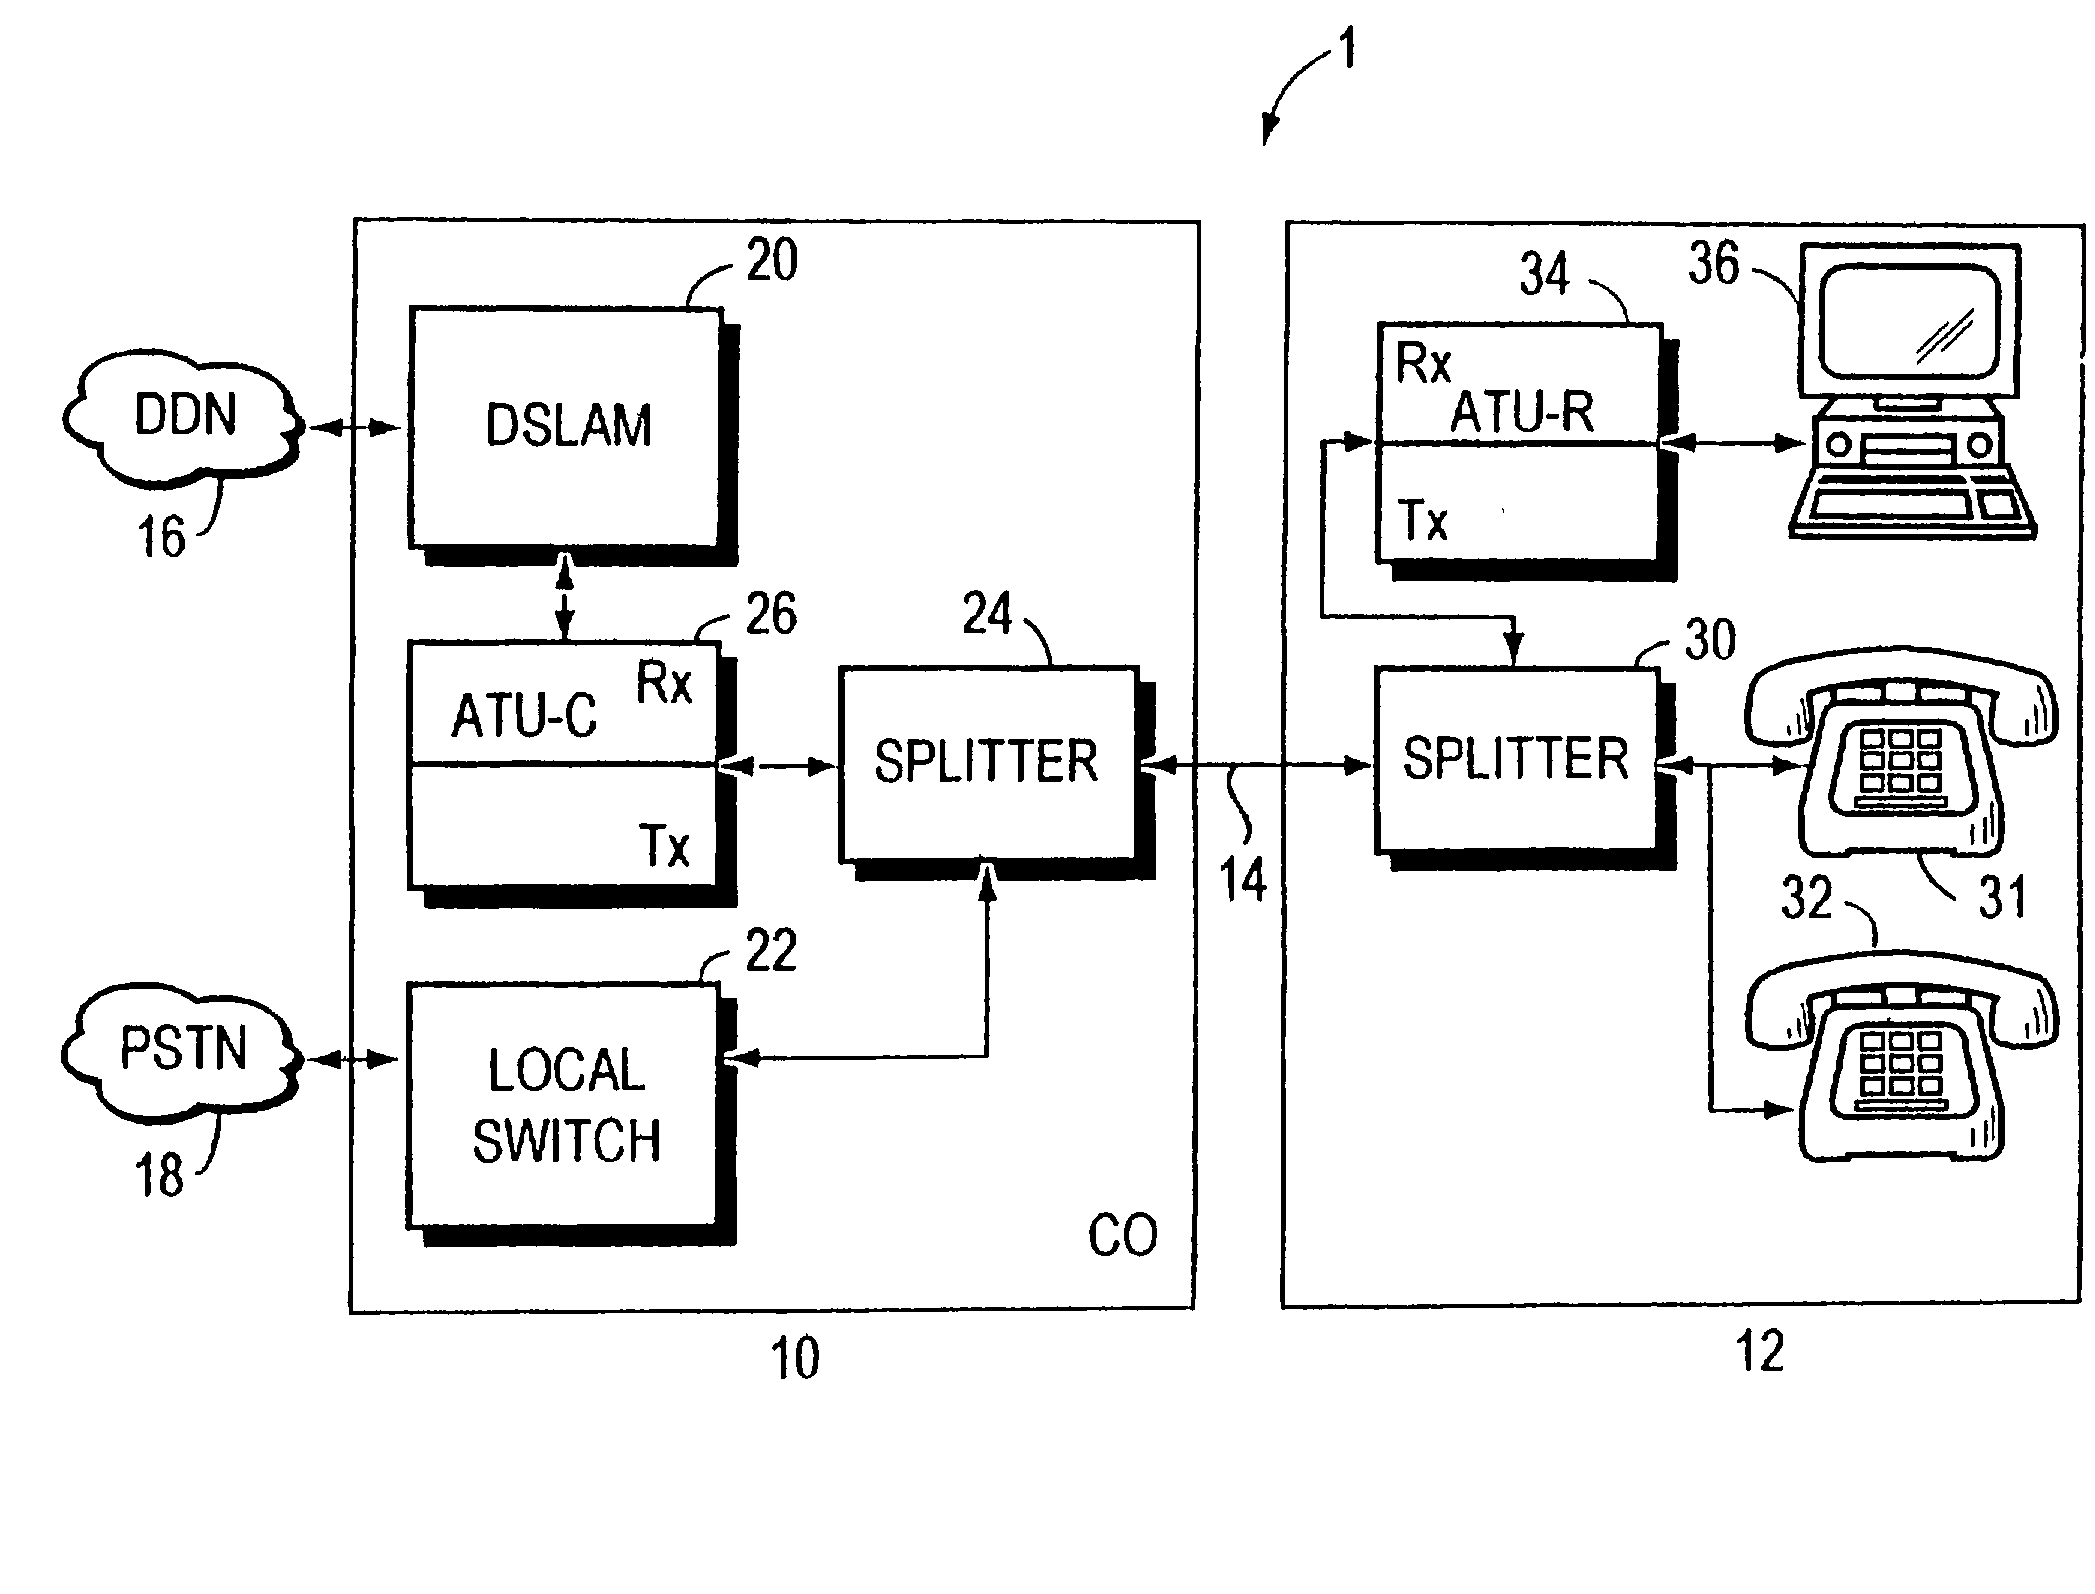 Multicarrier communication with variable overhead rate